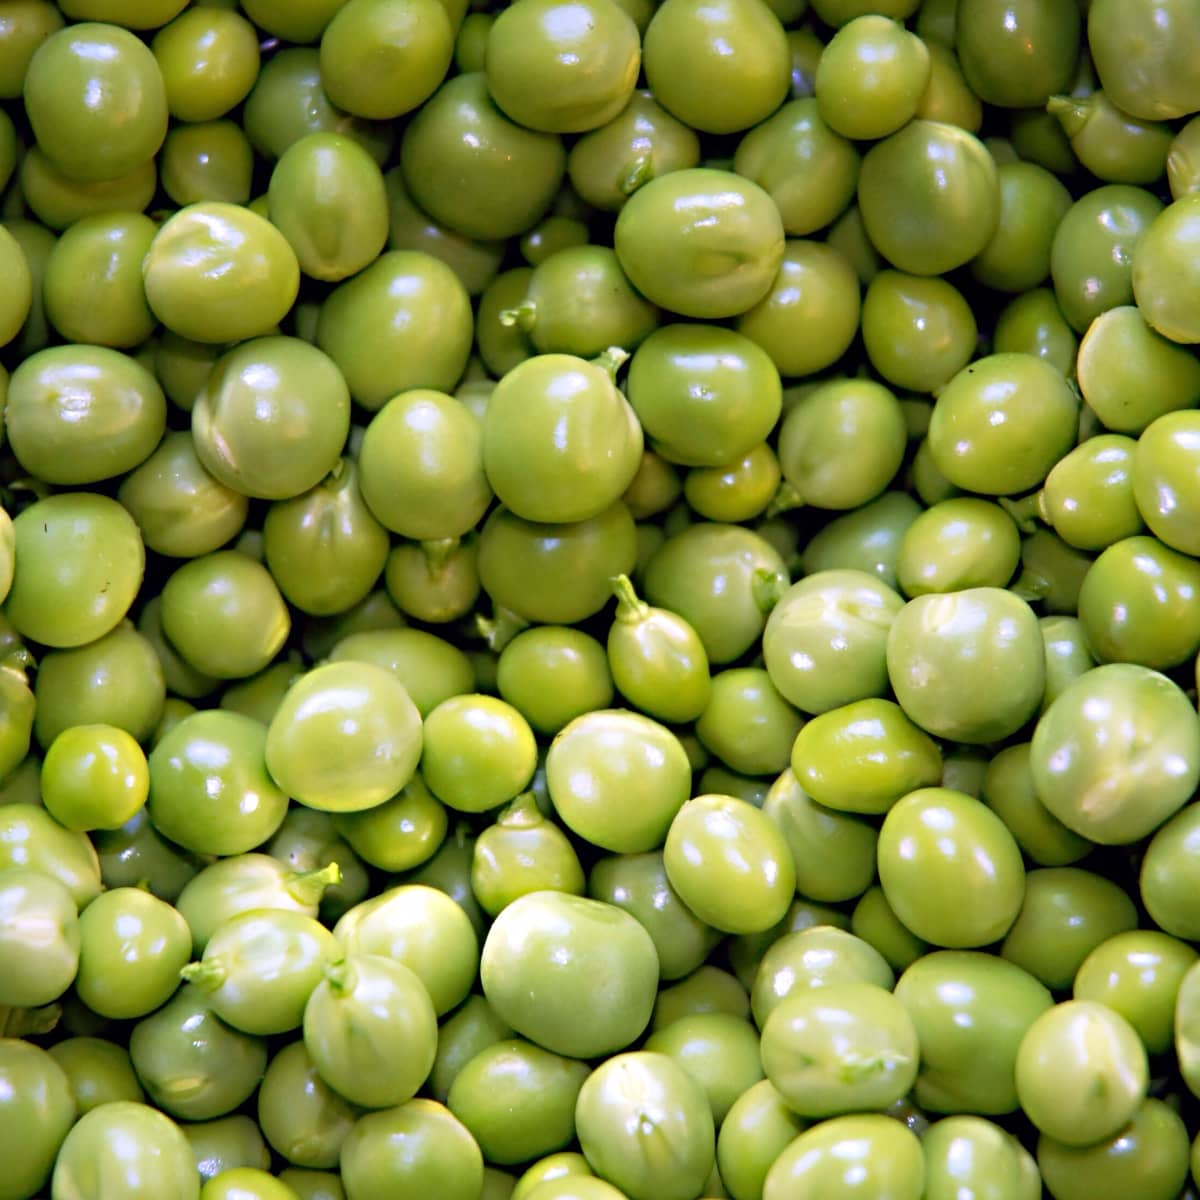 green peas images